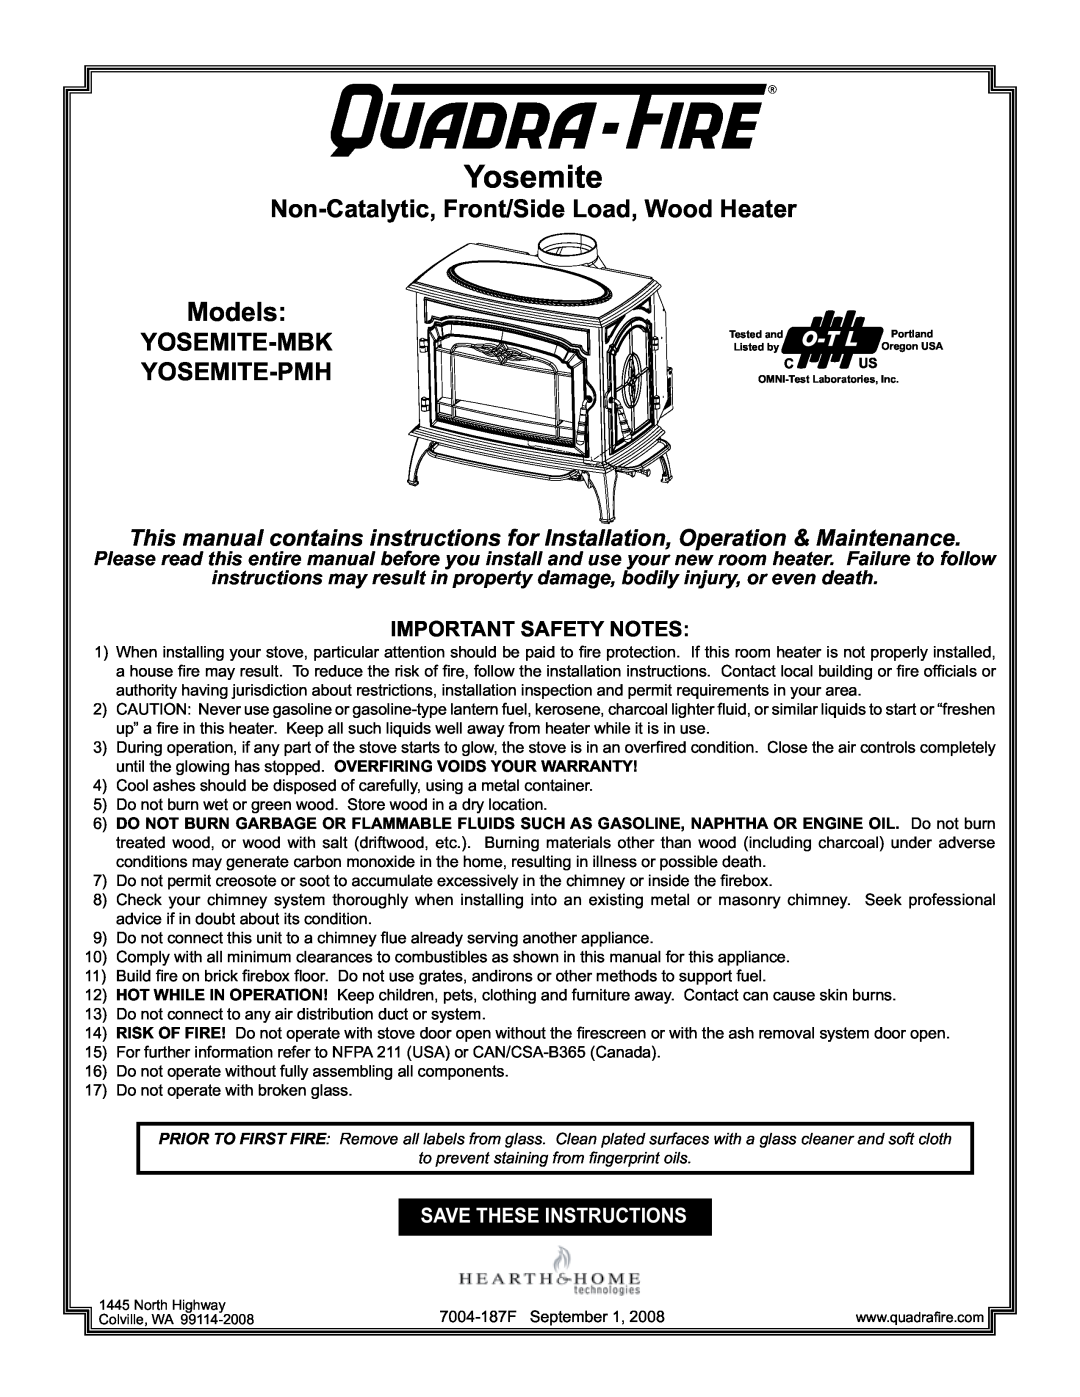 Hearth and Home Technologies MBK installation instructions Yosemite, Non-Catalytic, Front/Side Load, Wood Heater, Models 